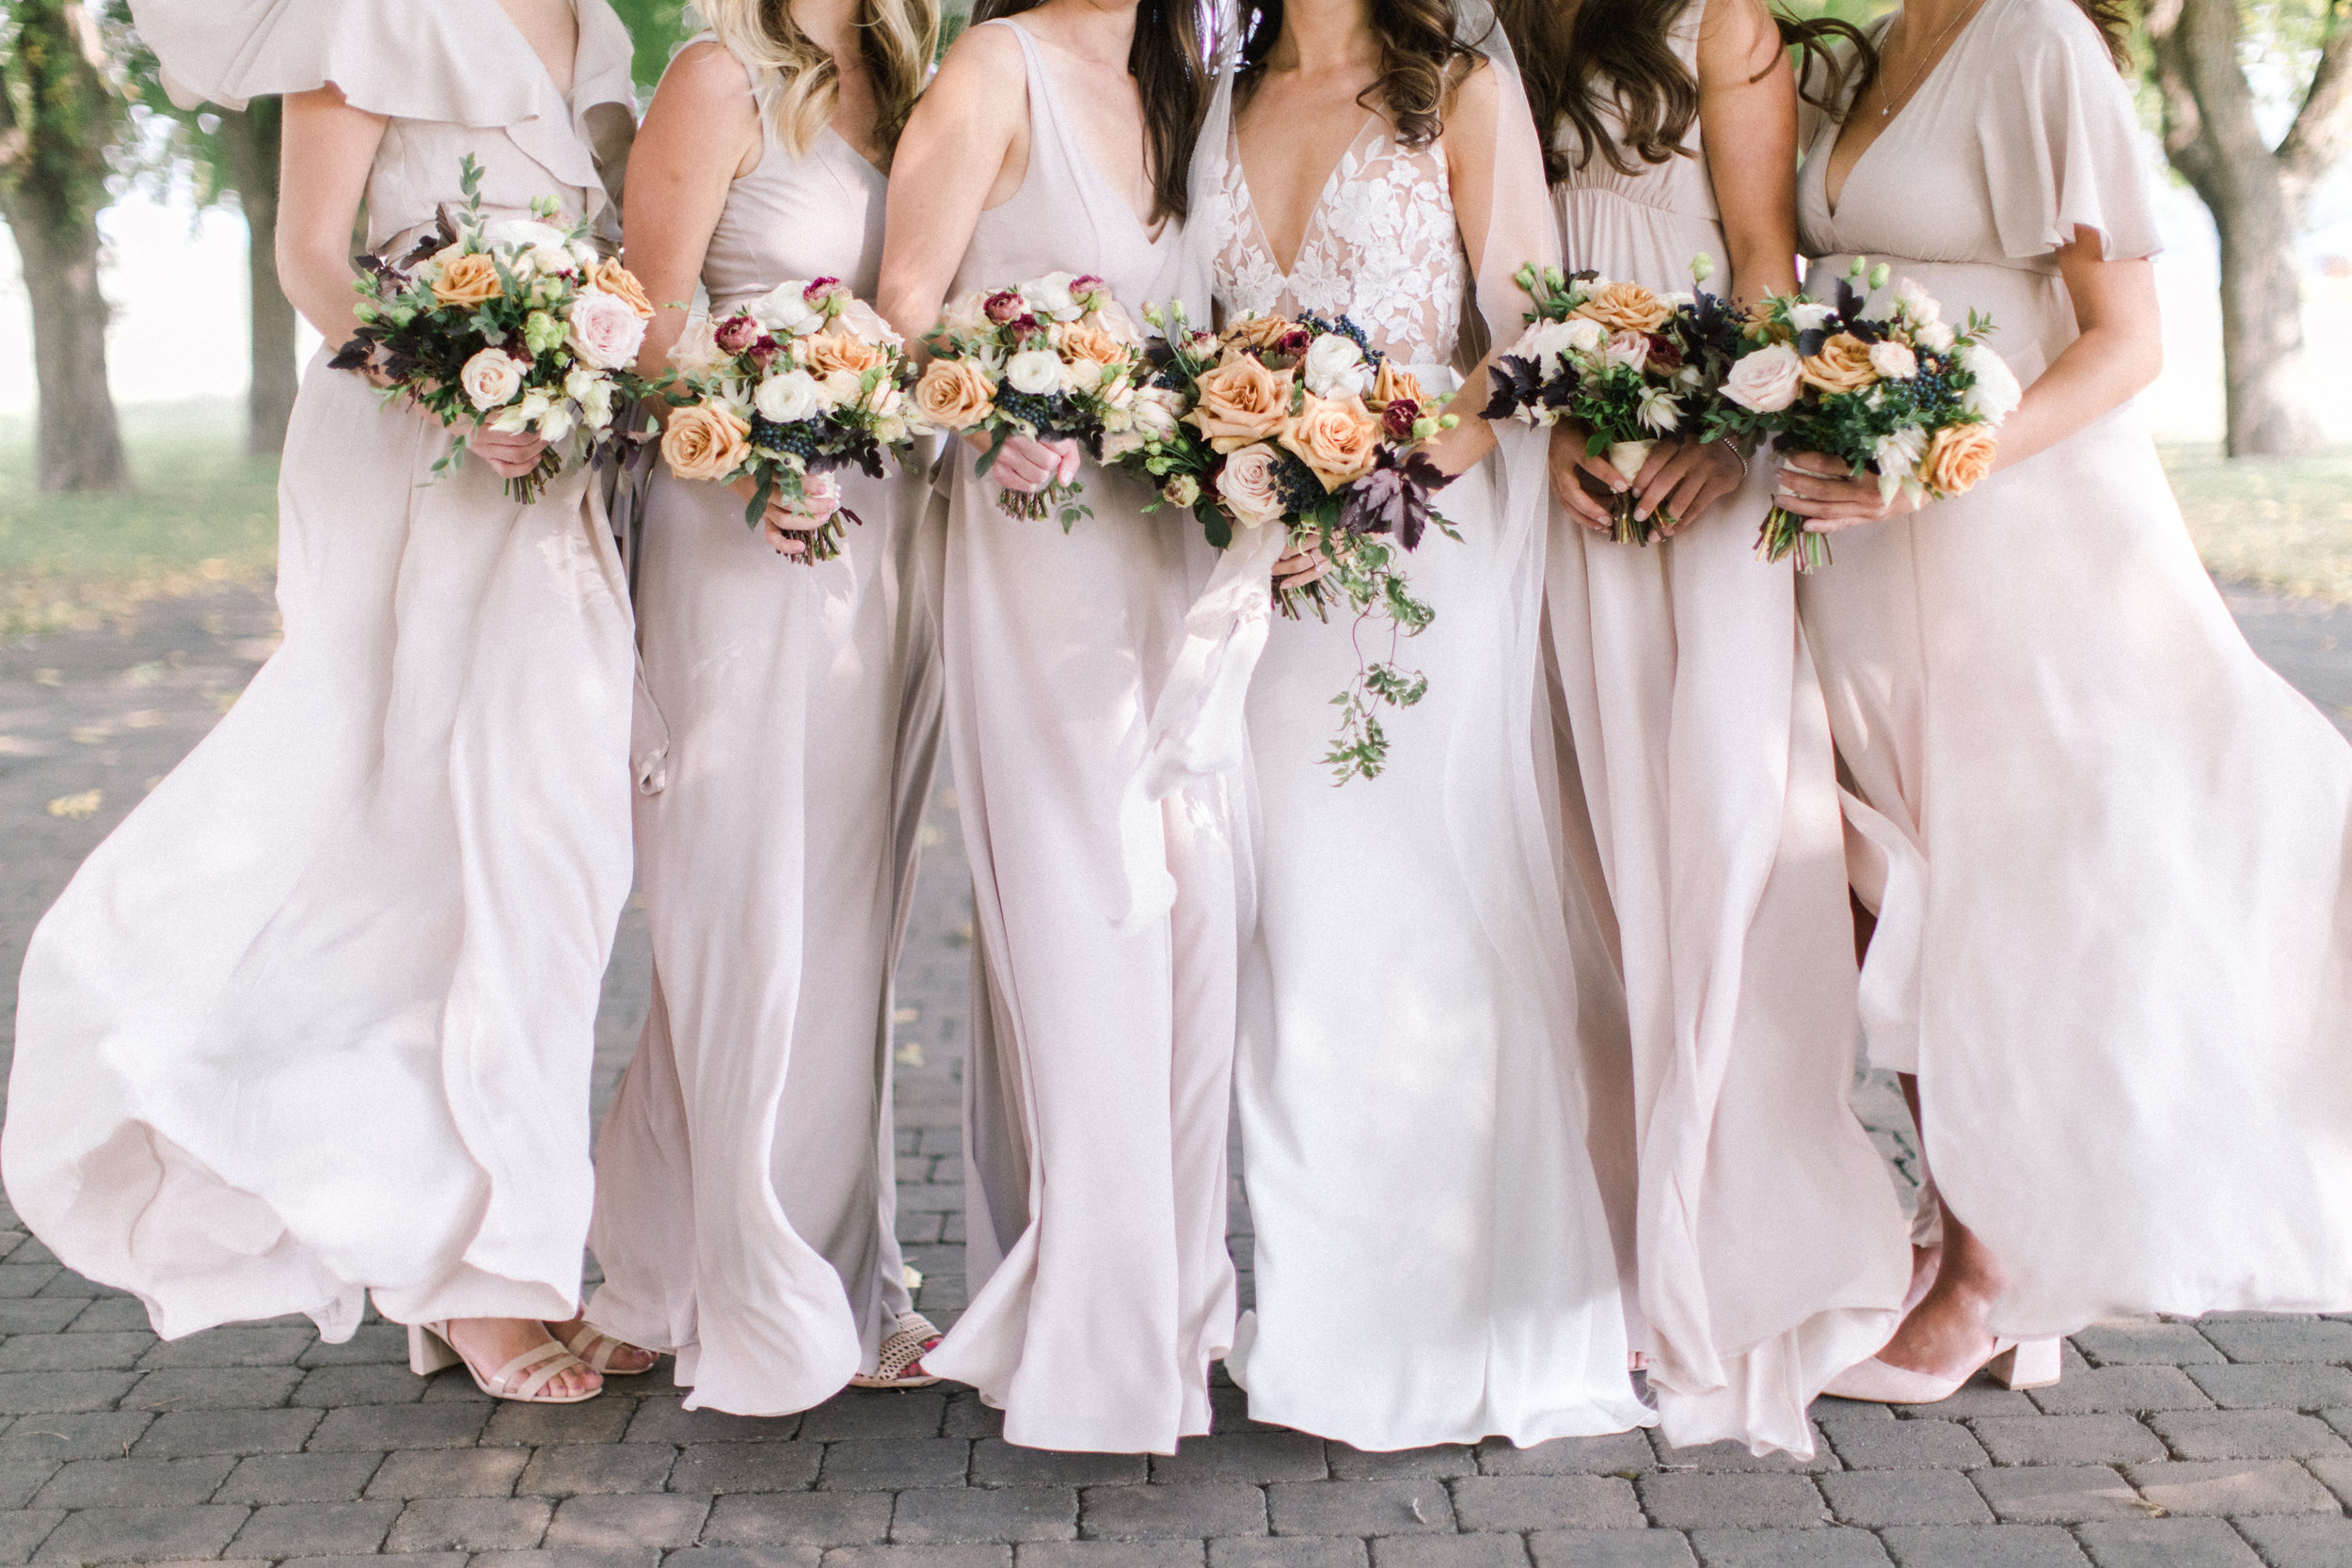 Bouquet Inspiration: 8 Bridal Party Bouquet Pictures Sure to Get You in the Mood For Wedding Season